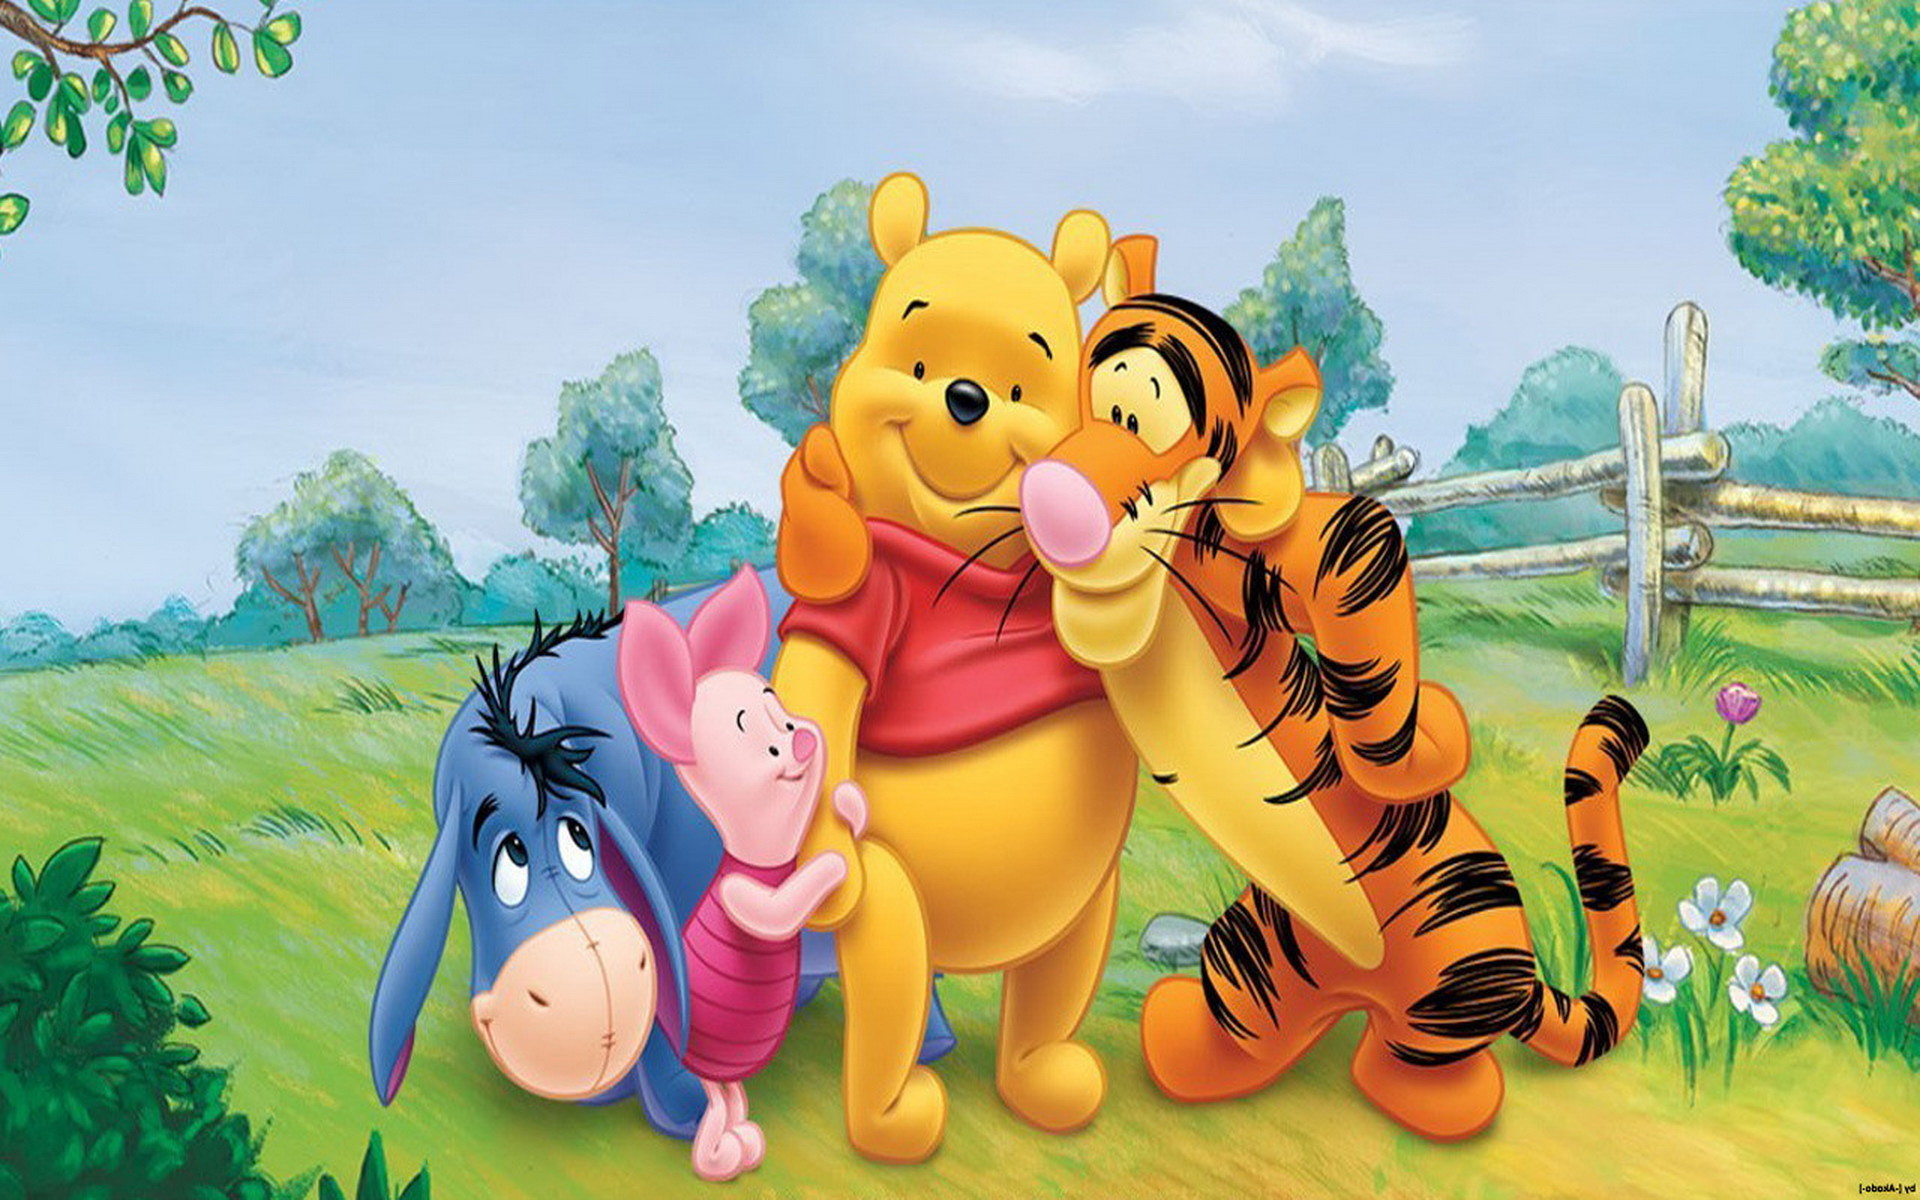 1920x1200 Disney Easter Piglet and Winnie the Pooh Wallpaper PuzzlesGames 1920Ã1200